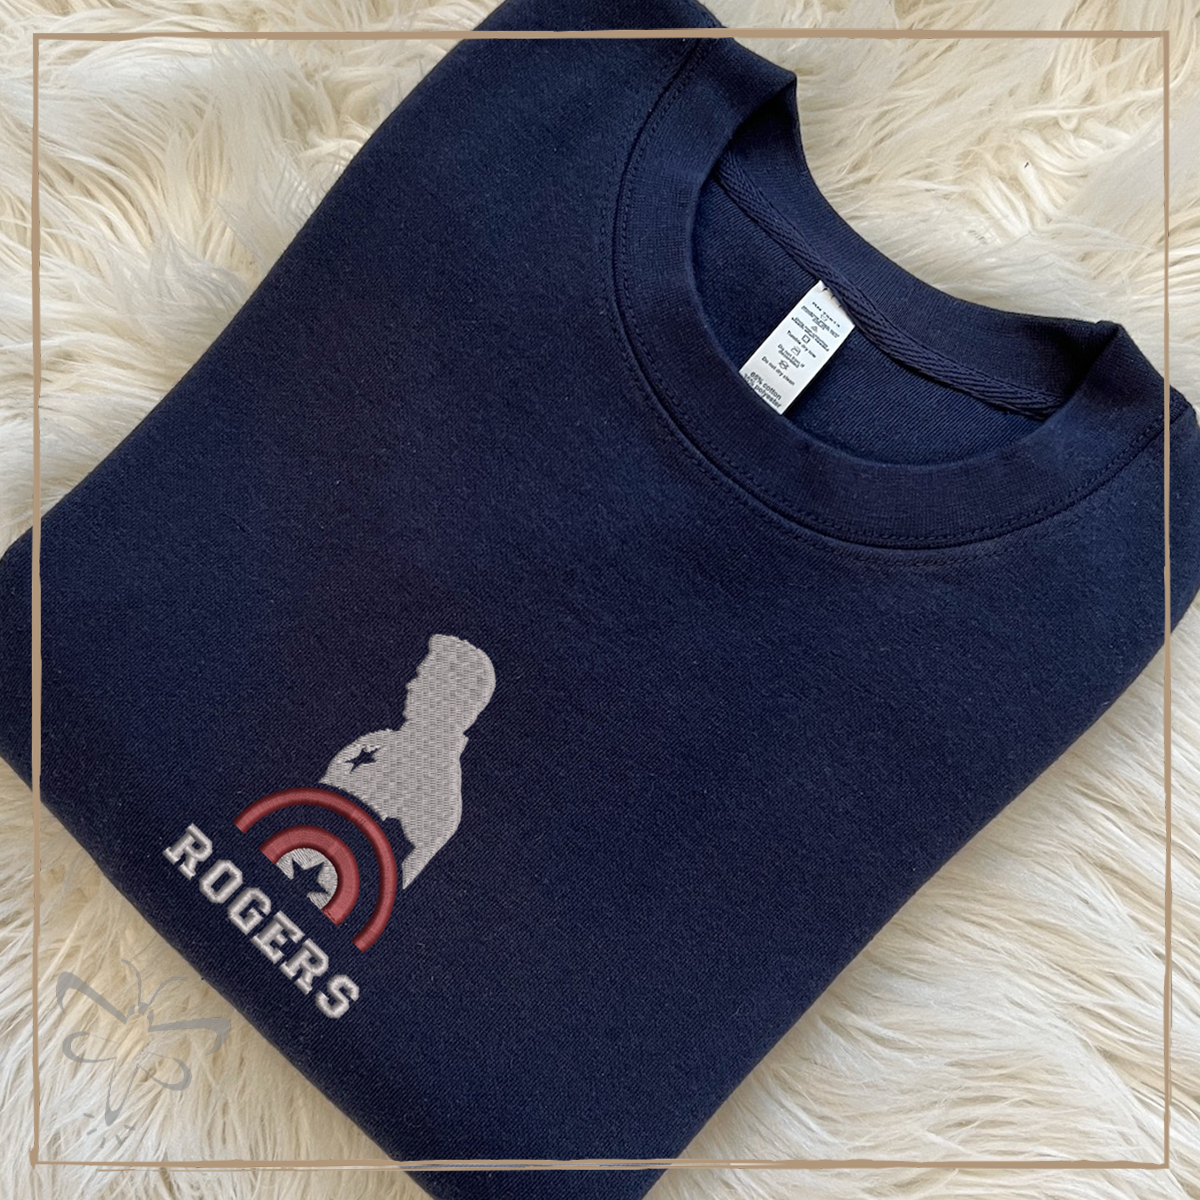 Rogers Embroidered Crewneck Xs / Navy Sweater